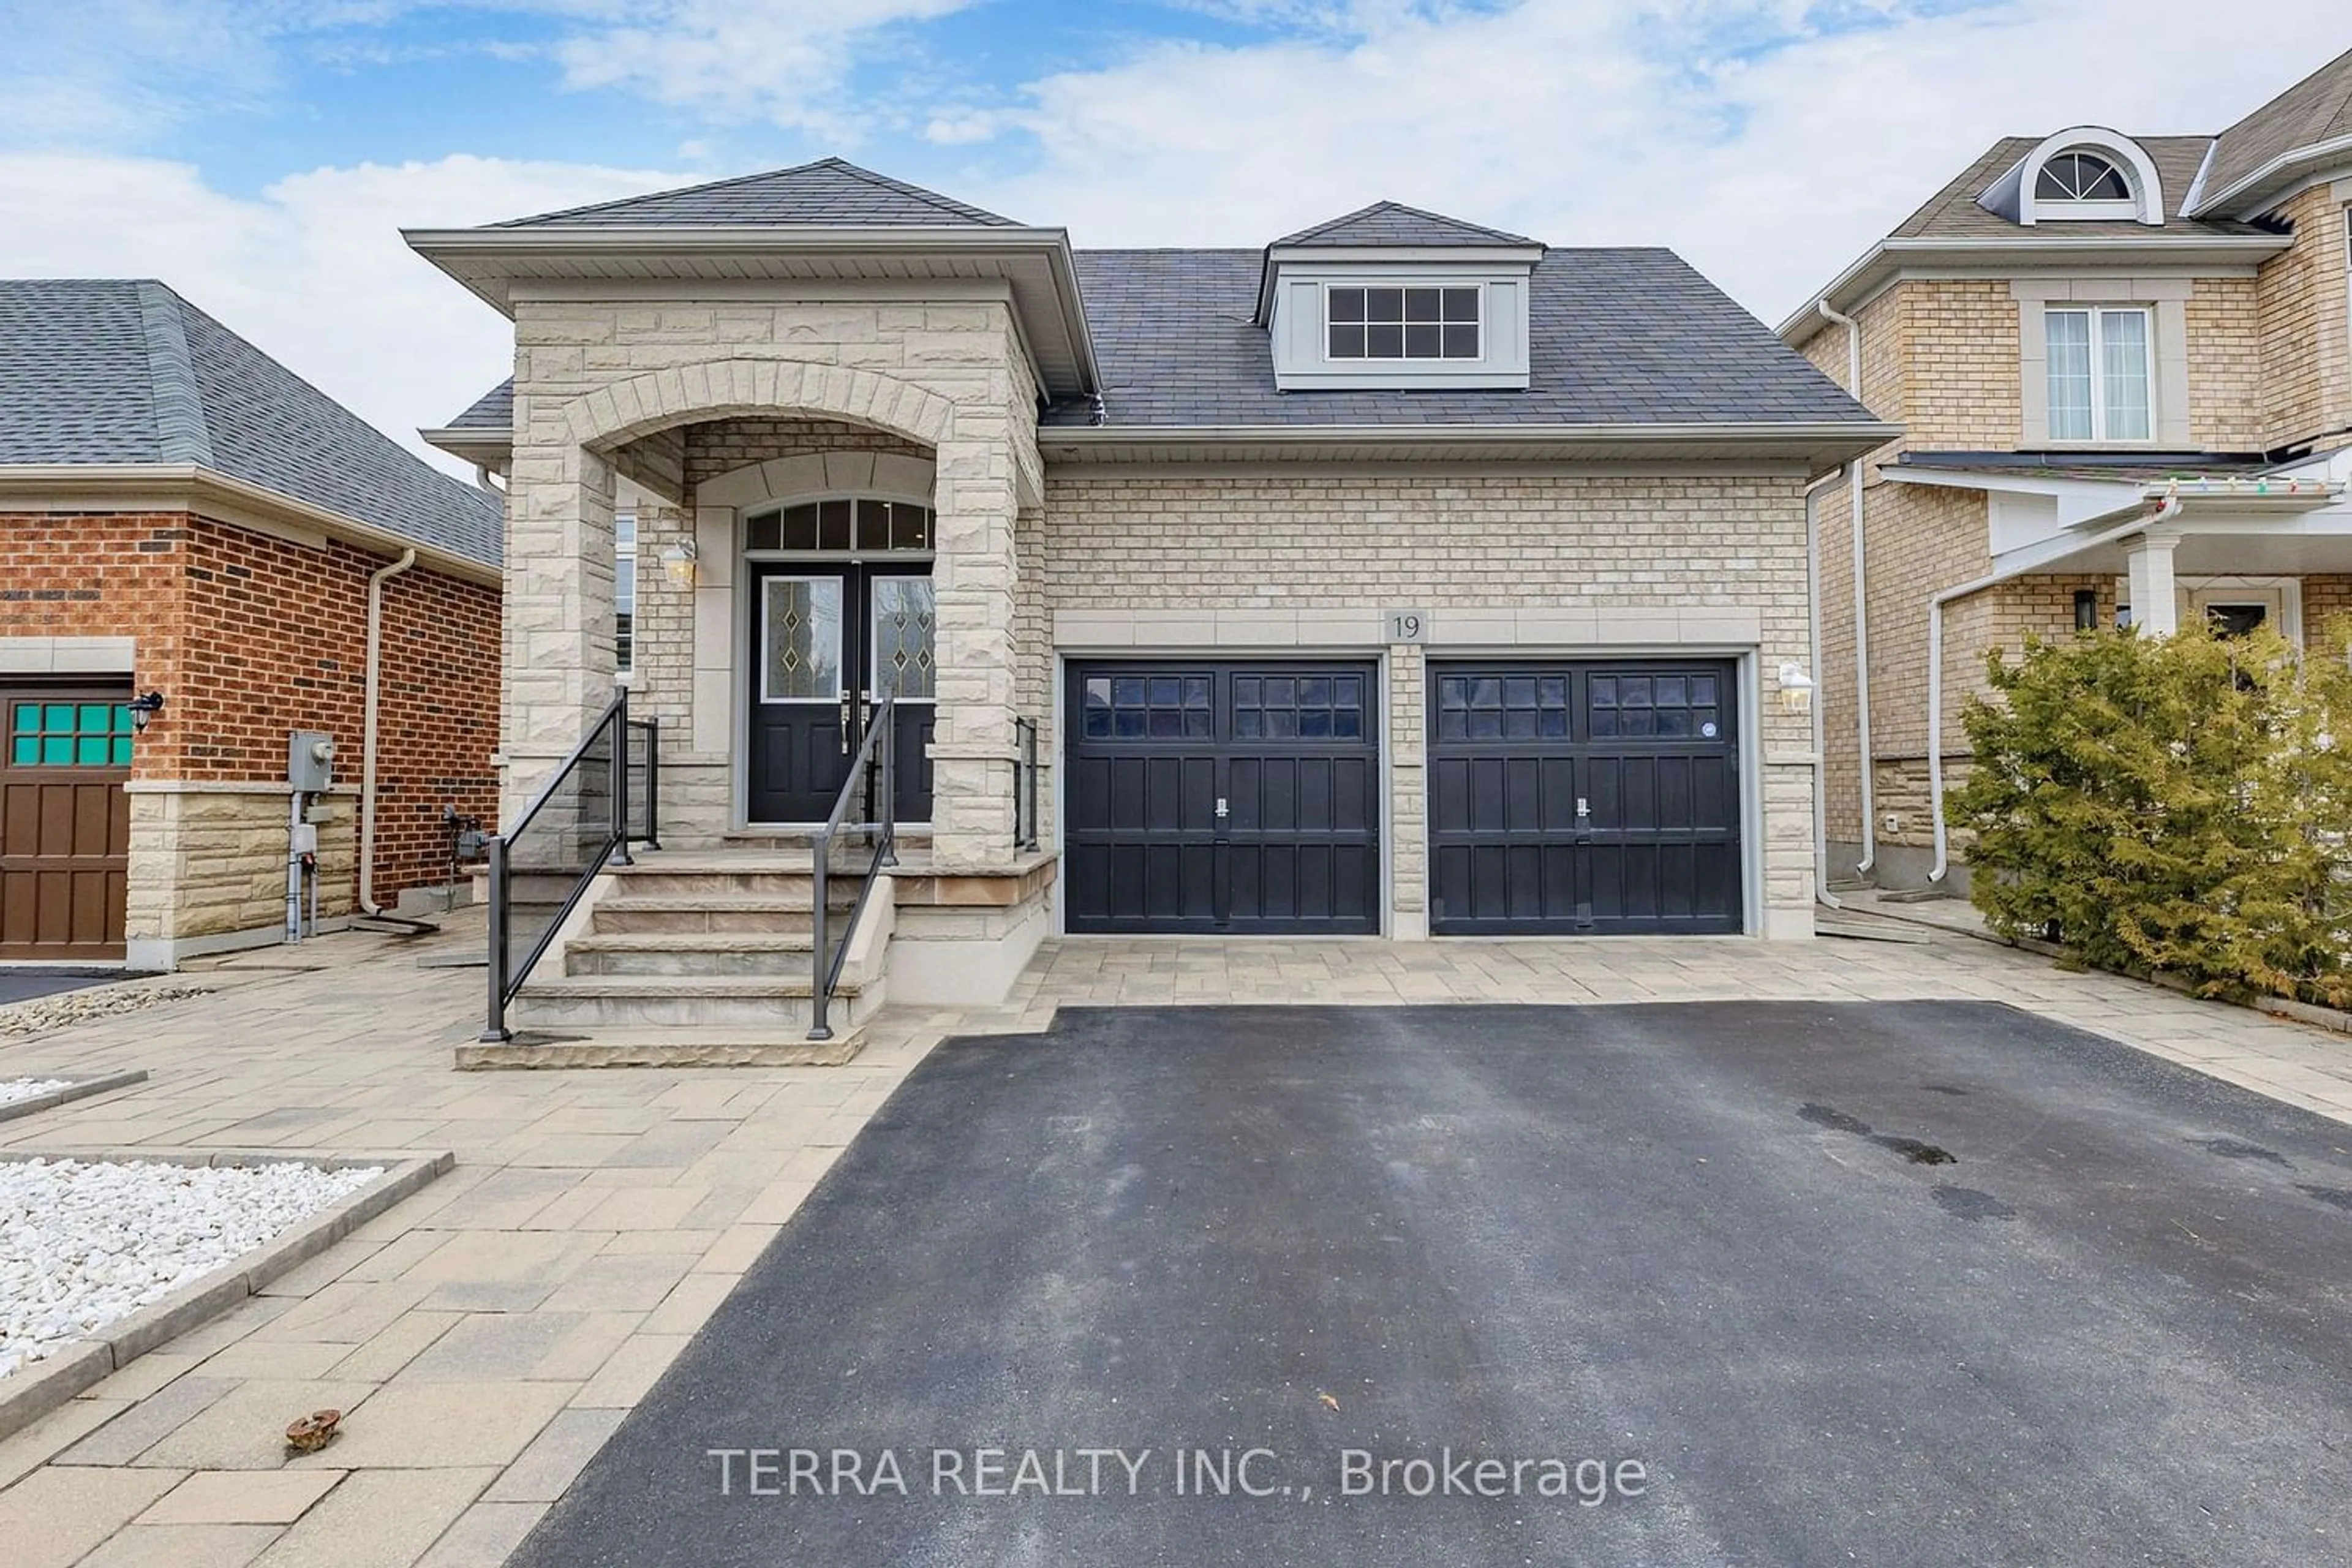 Home with brick exterior material for 19 Isaiah Dr, Vaughan Ontario L4H 0C3